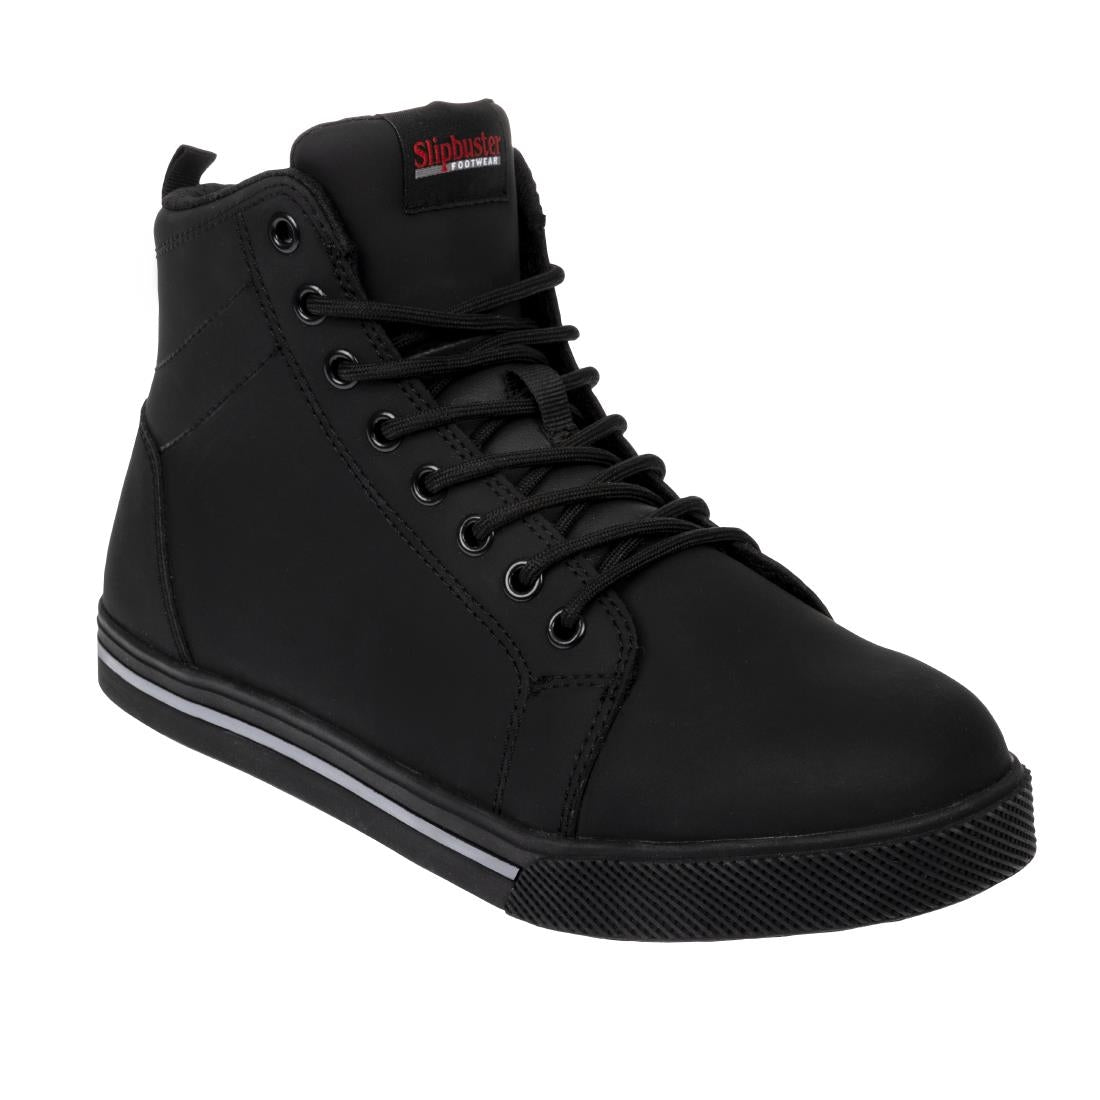 BA061-41 Slipbuster Recycled Microfibre Safety Hi Top Boots Matte Black 41 JD Catering Equipment Solutions Ltd